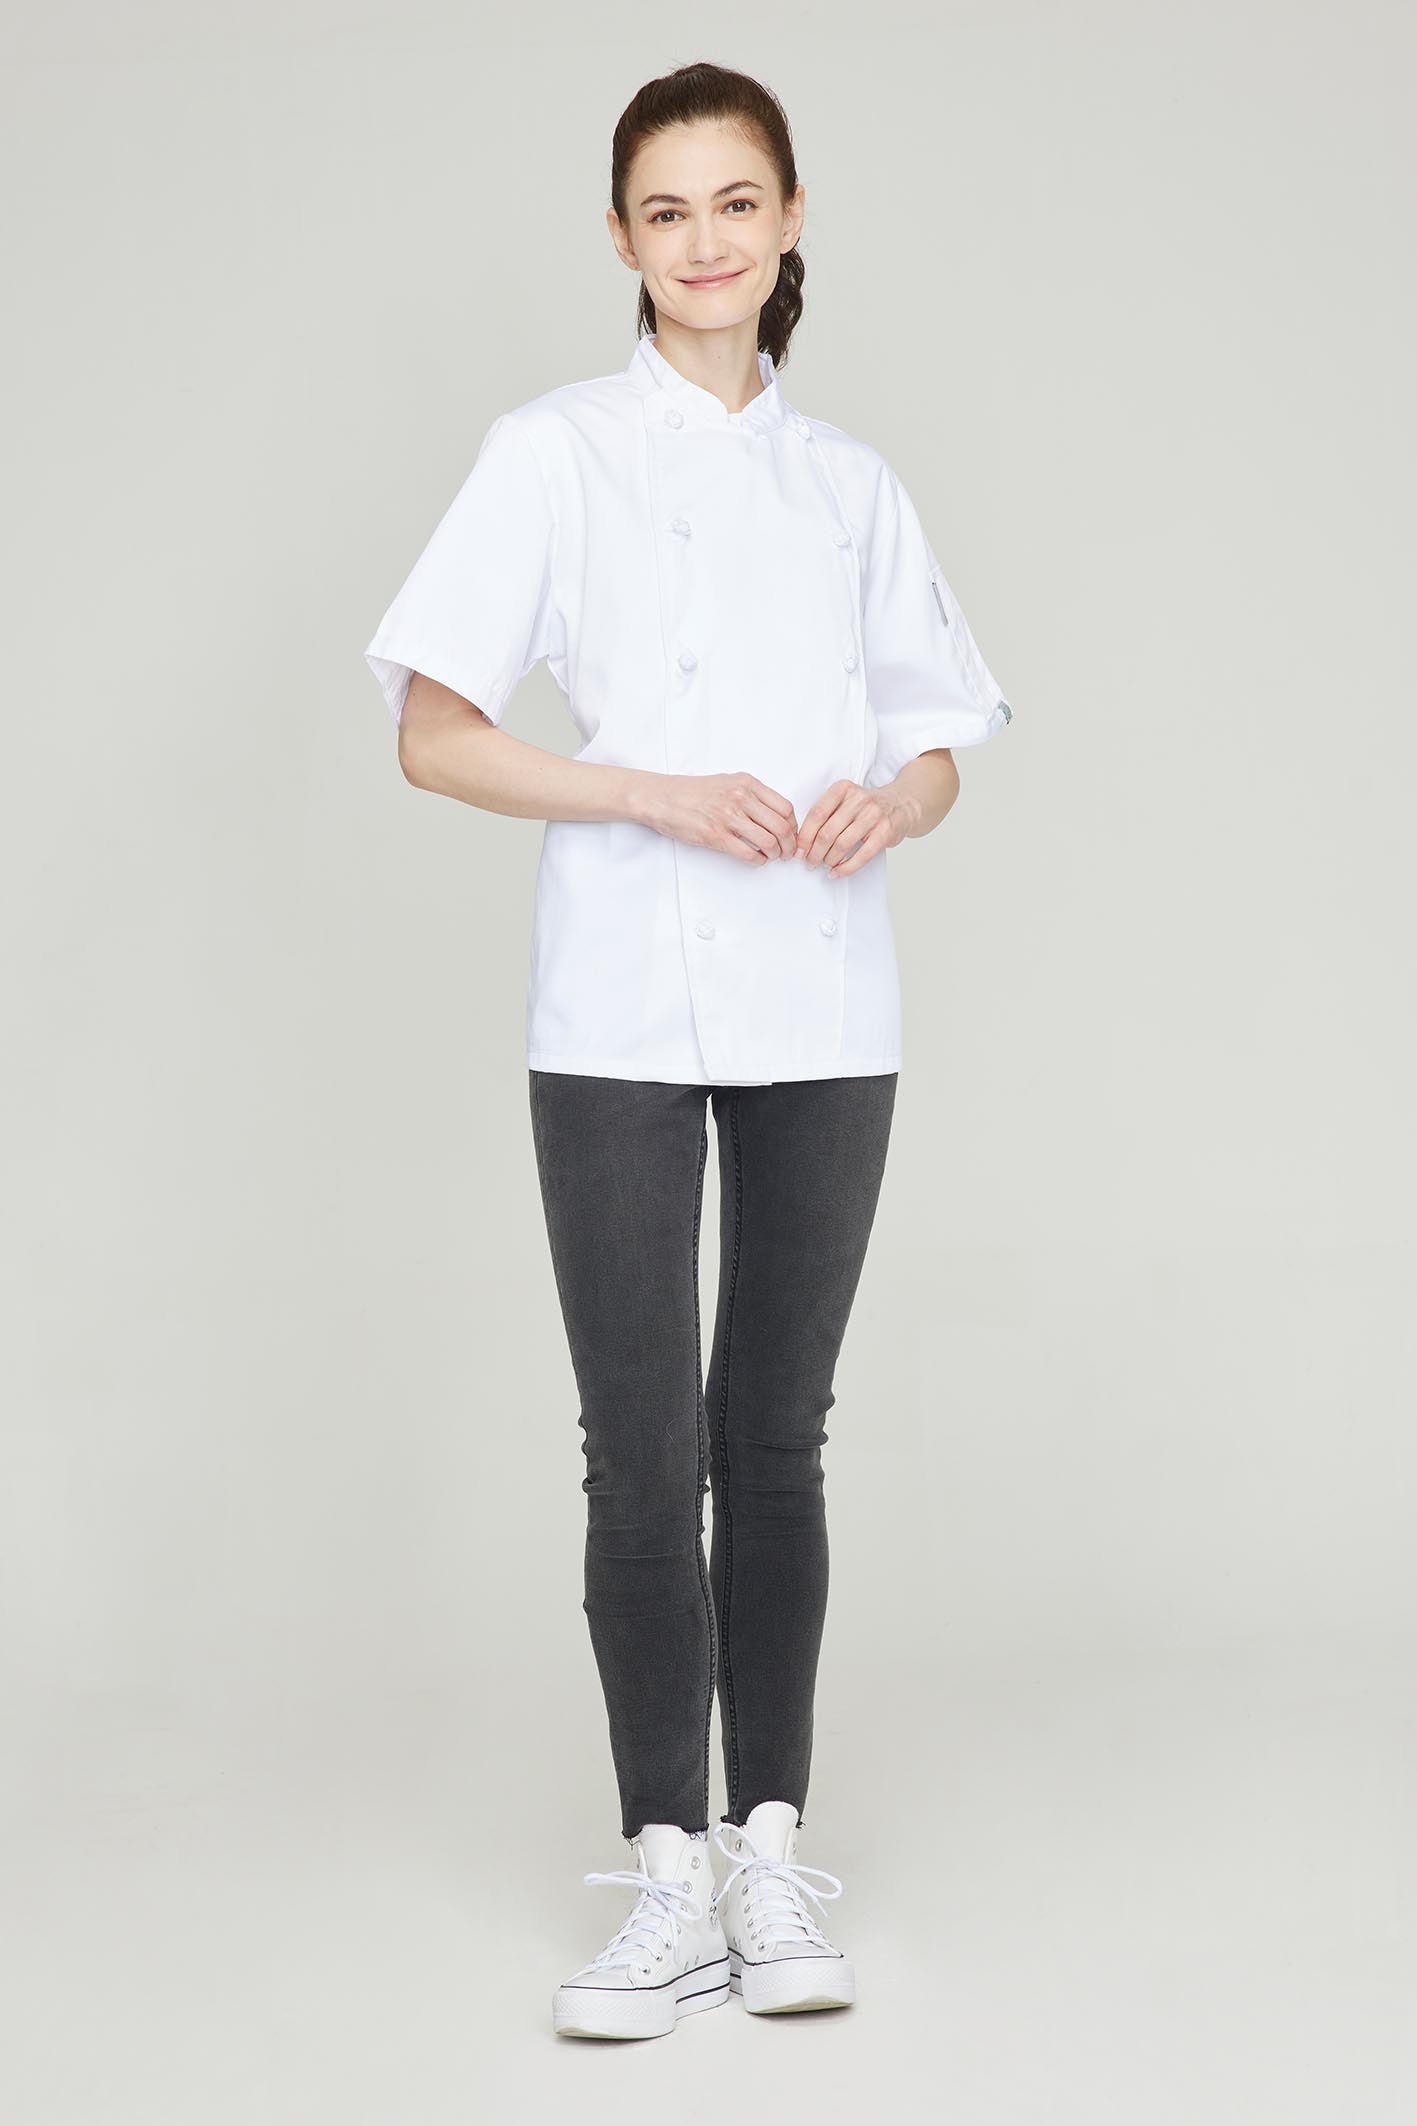 Women's BioNTex™  Double Breasted Button Closure Chef Coat